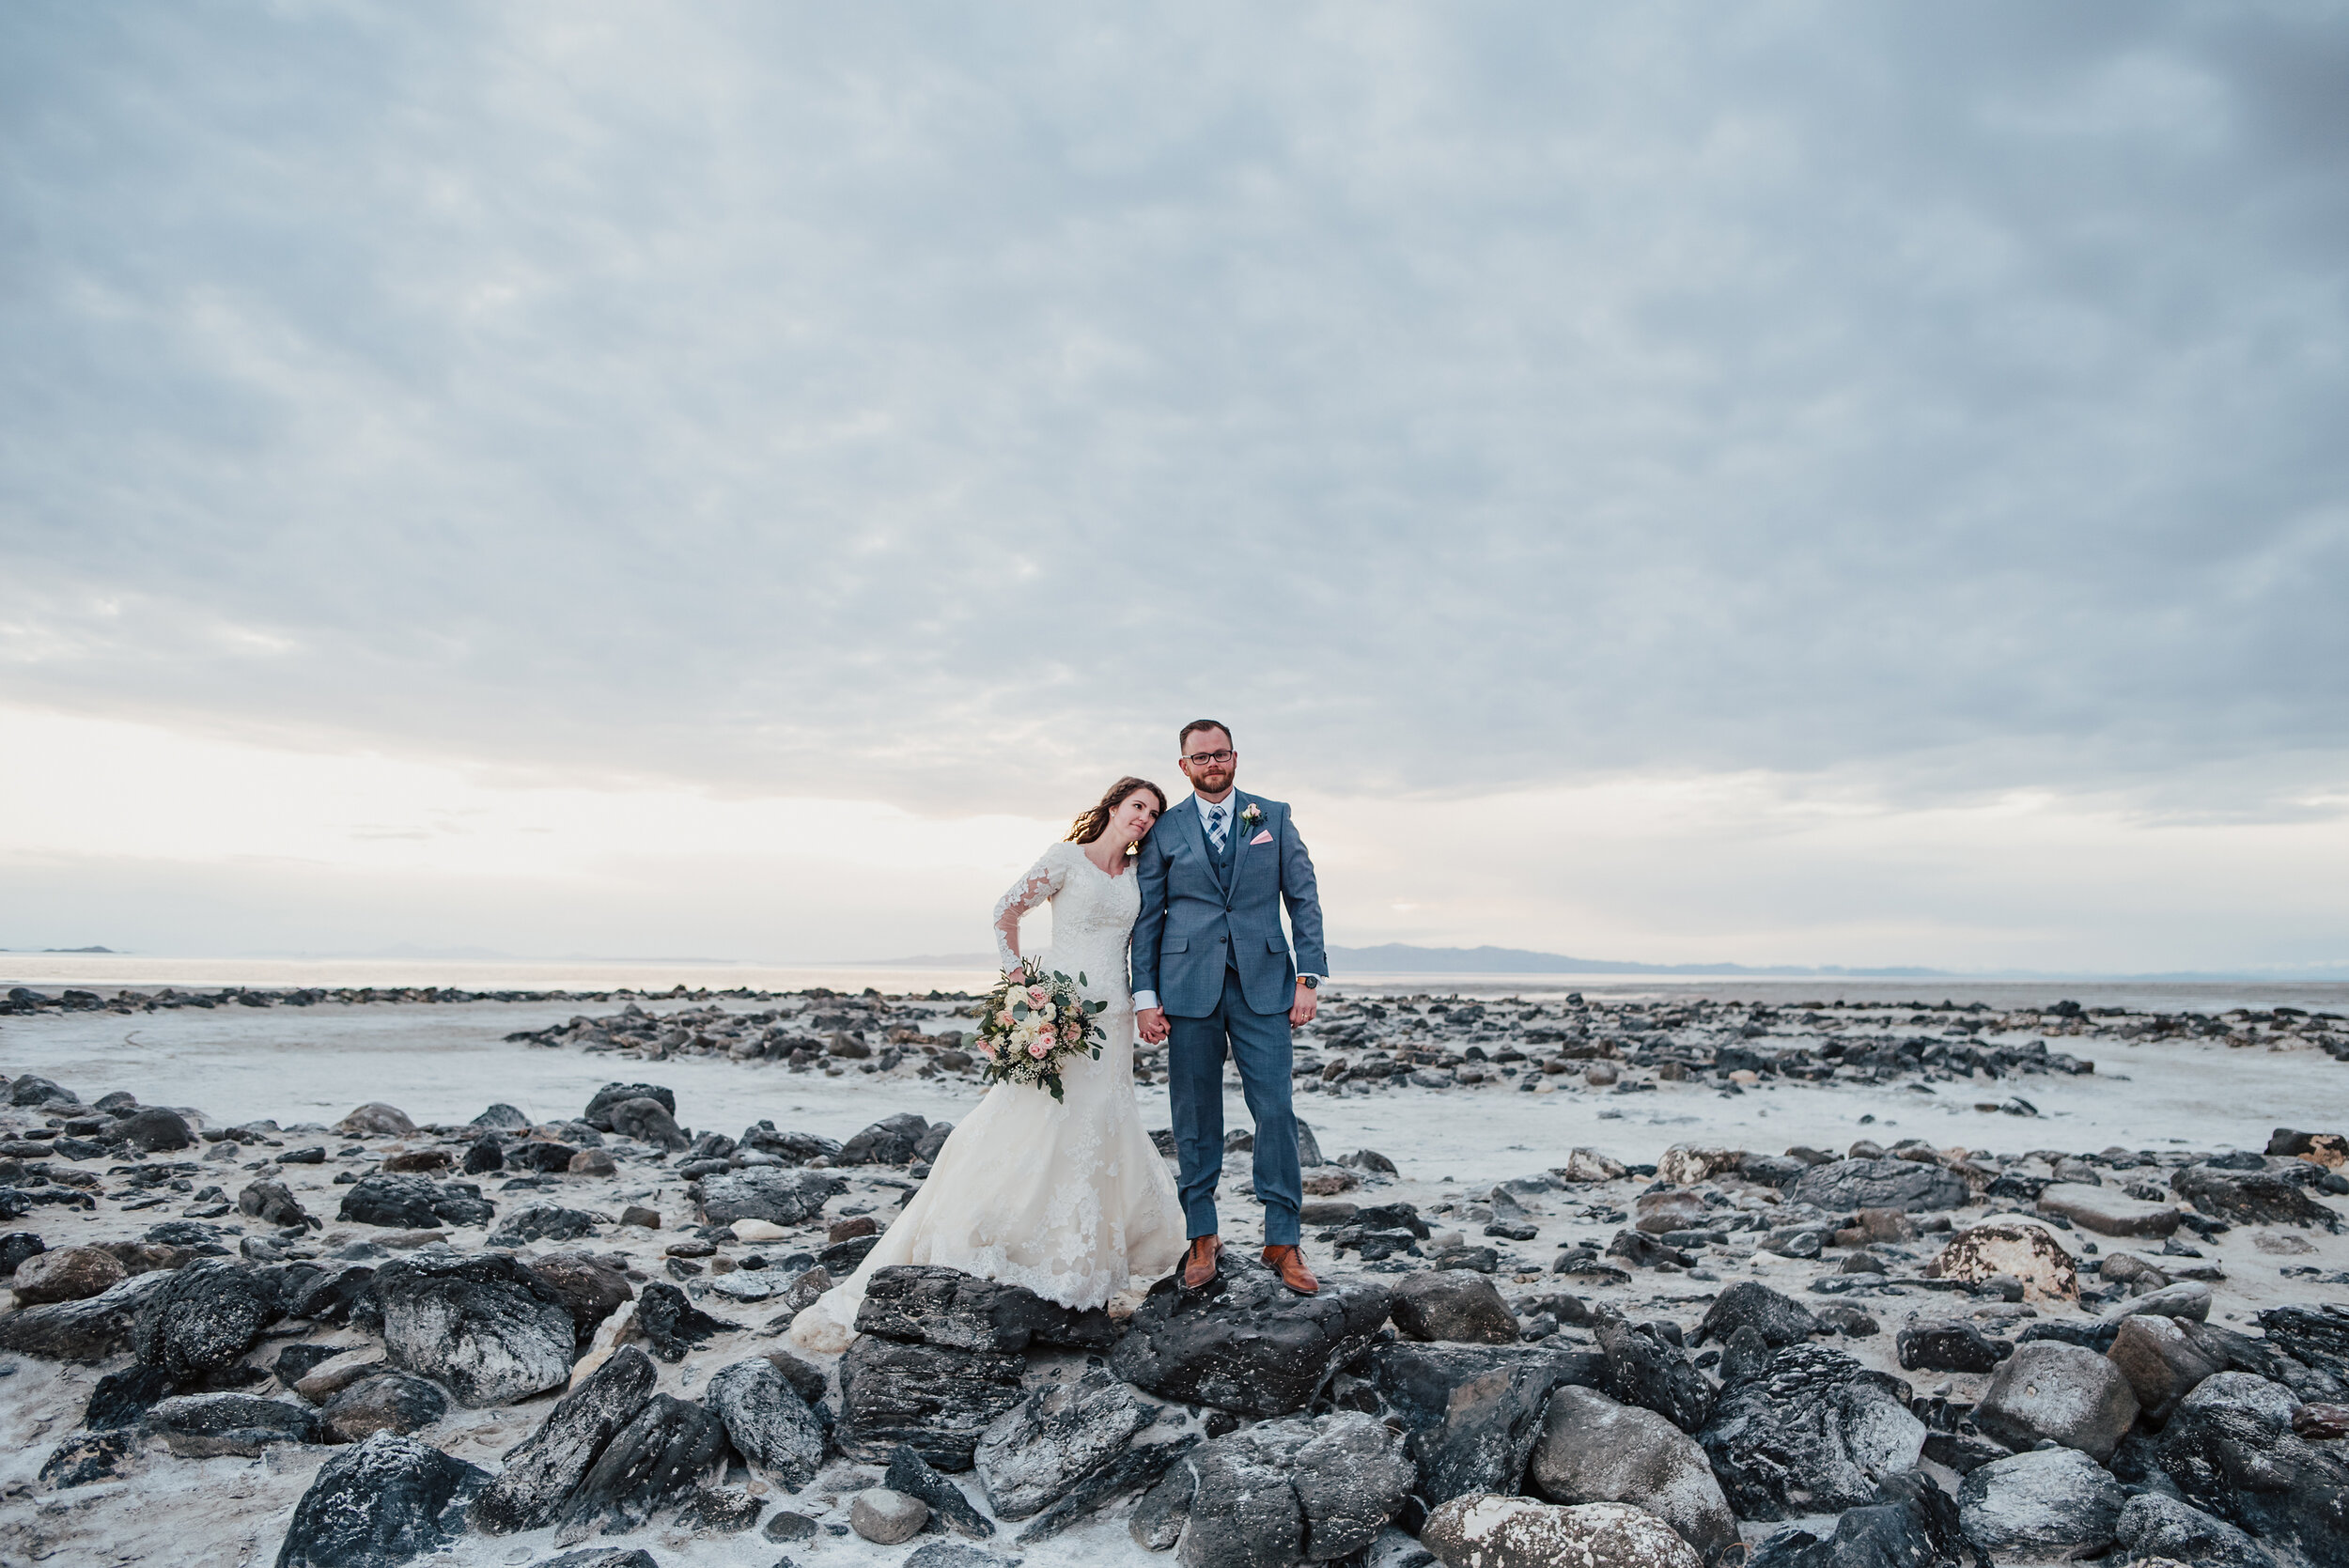  Standing on the rocks at the Spiral Jetty, this bride and groom took in all of the natural elements available during their wedding formal photoshoot. Spiral Jetty Northern Utah Great Salt Lake photography wedding formals natural photo aesthetic bride and groom #spiraljetty #utahphotography #weddingformals #gettingmarried #weddingattire #utahwedding #greatoutdoorswedding #weddingformalsphotoshoot #naturalbeauty 